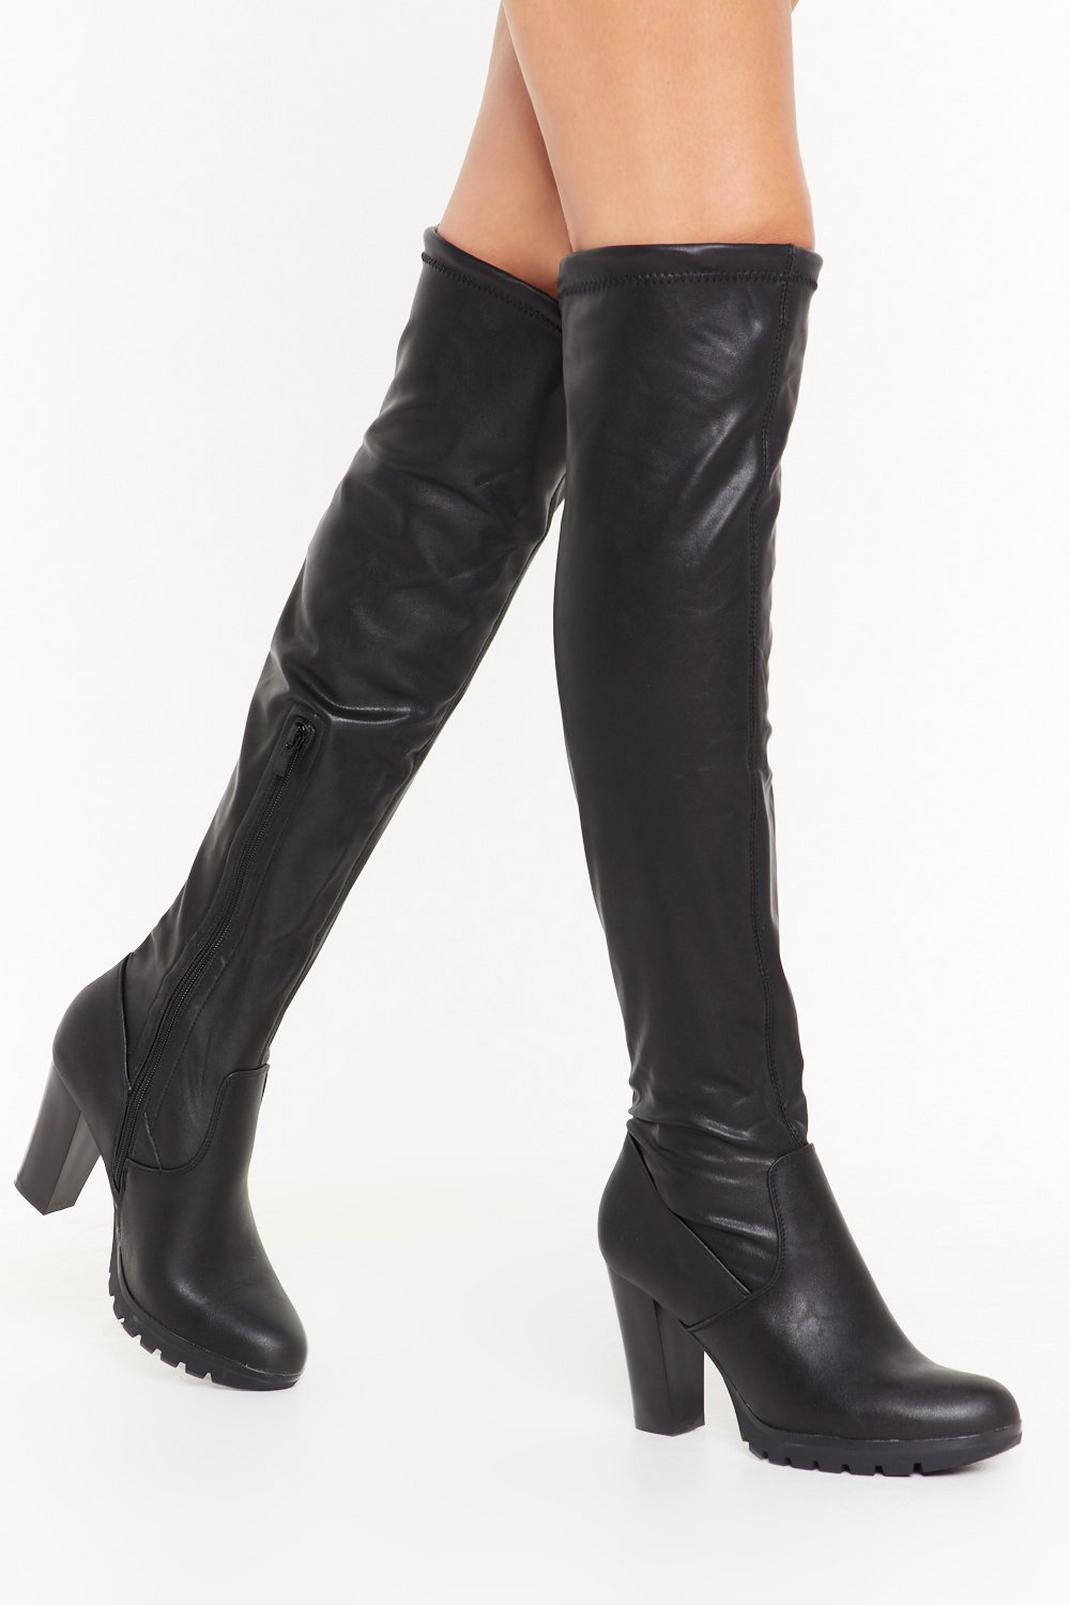 Let's Walk It Over-the-Knee Faux Leather Boots image number 1